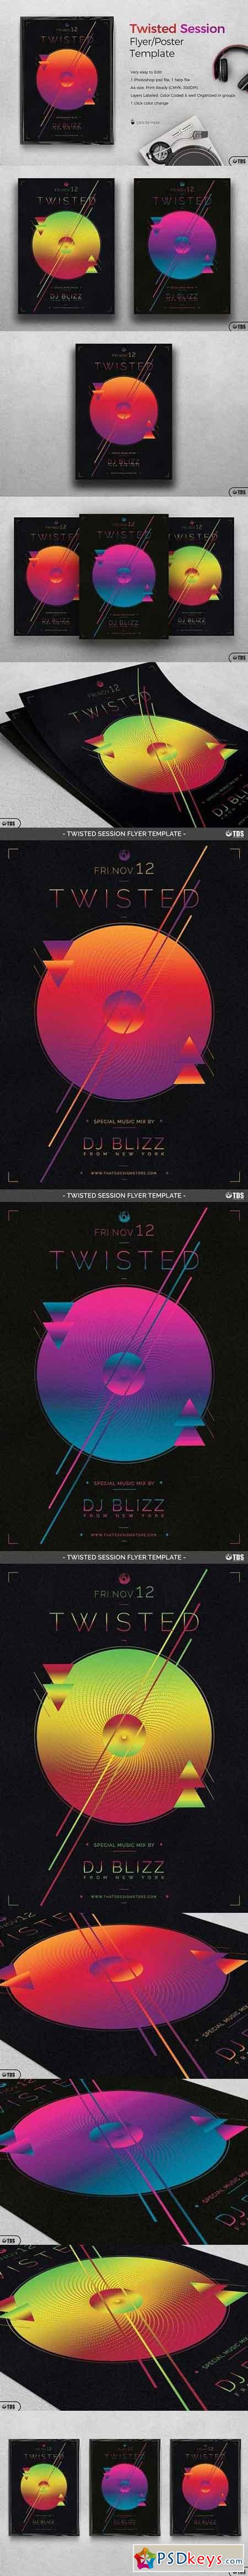 Twisted Session Flyer Template 1249716